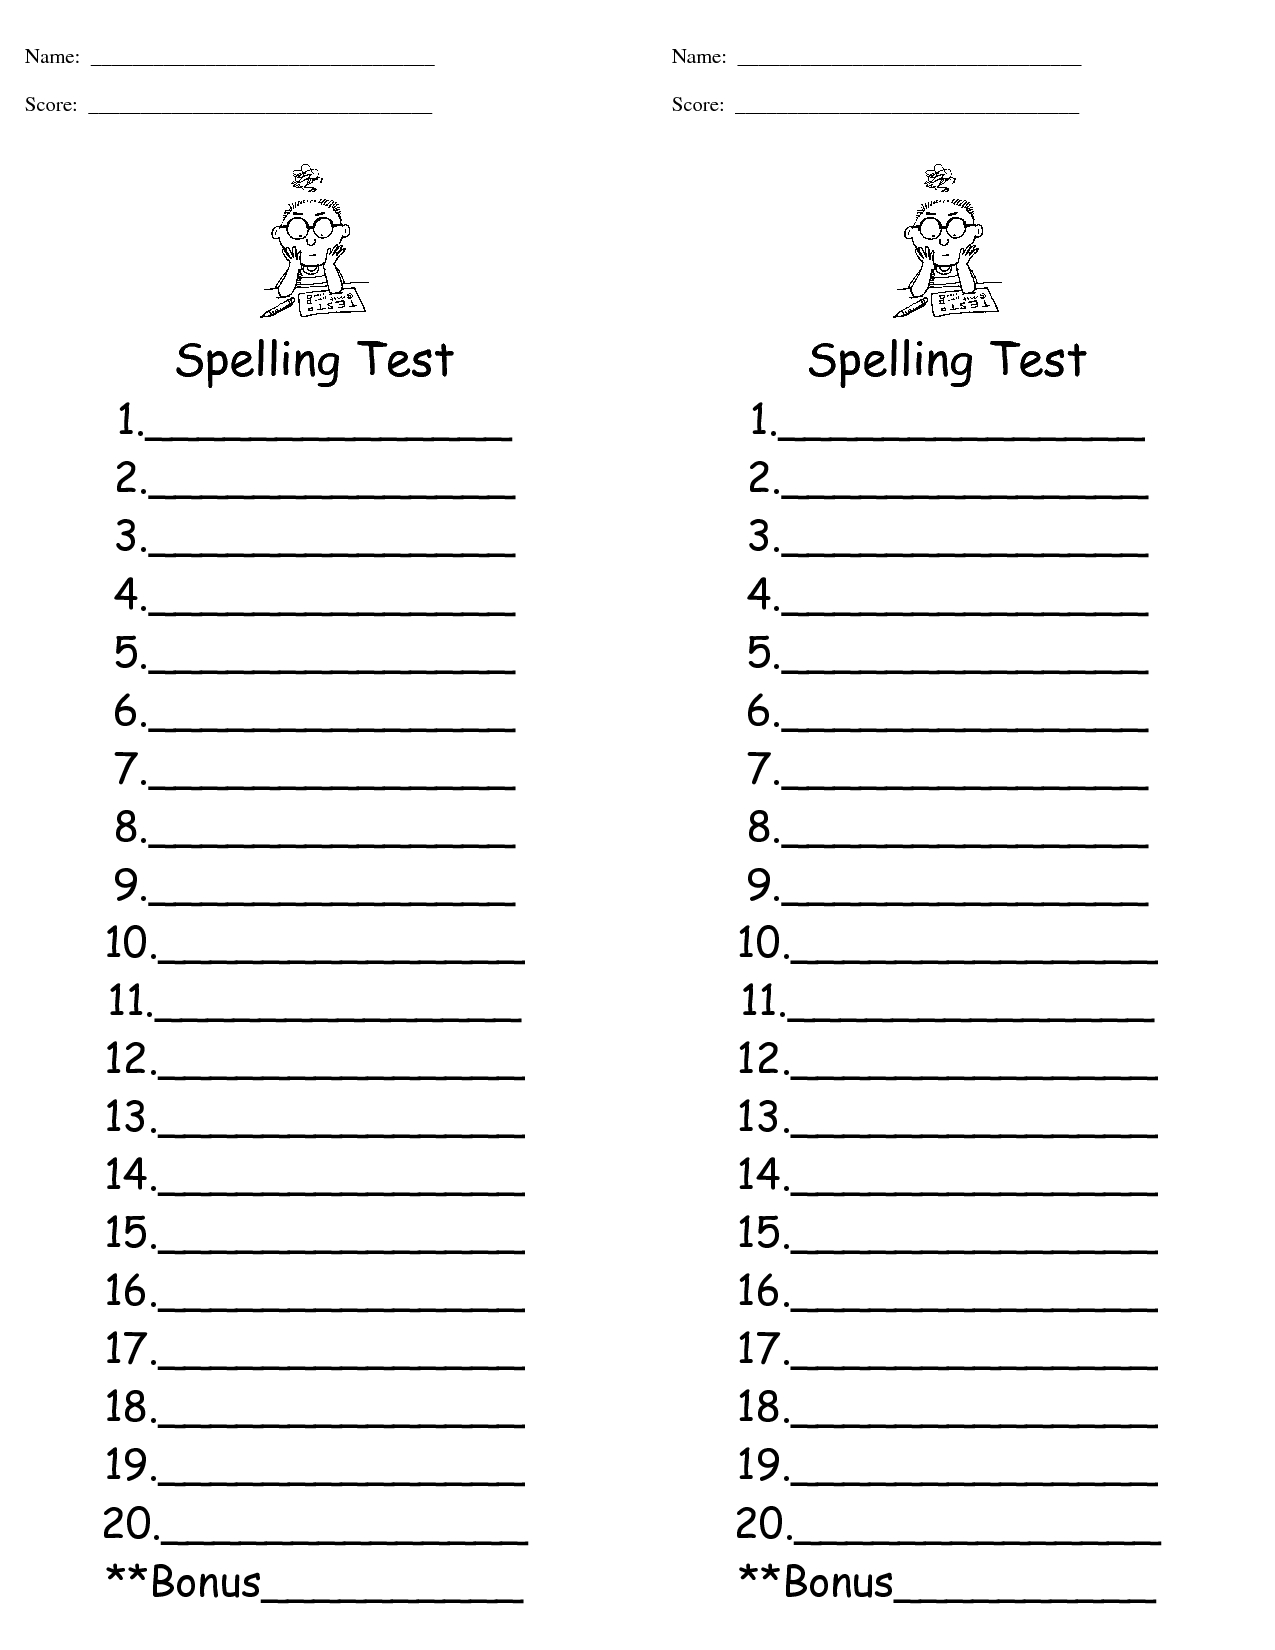 29 Images Of Spelling Words Test Template 9 | Jackmonster Intended For Test Template For Word